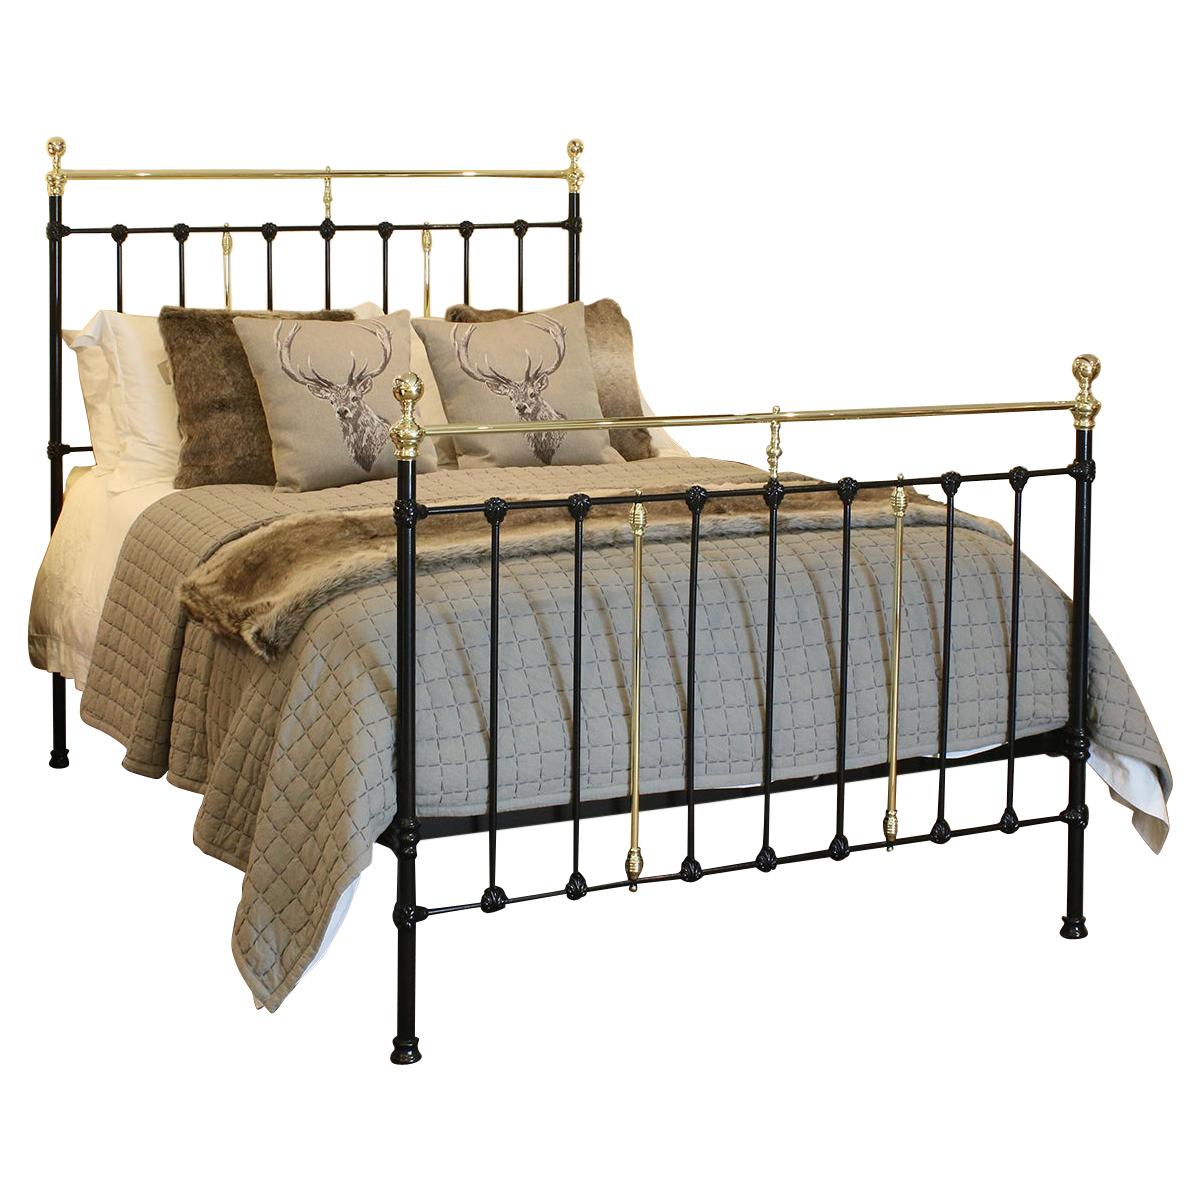 Black Iron and Brass Antique Bed, MK180